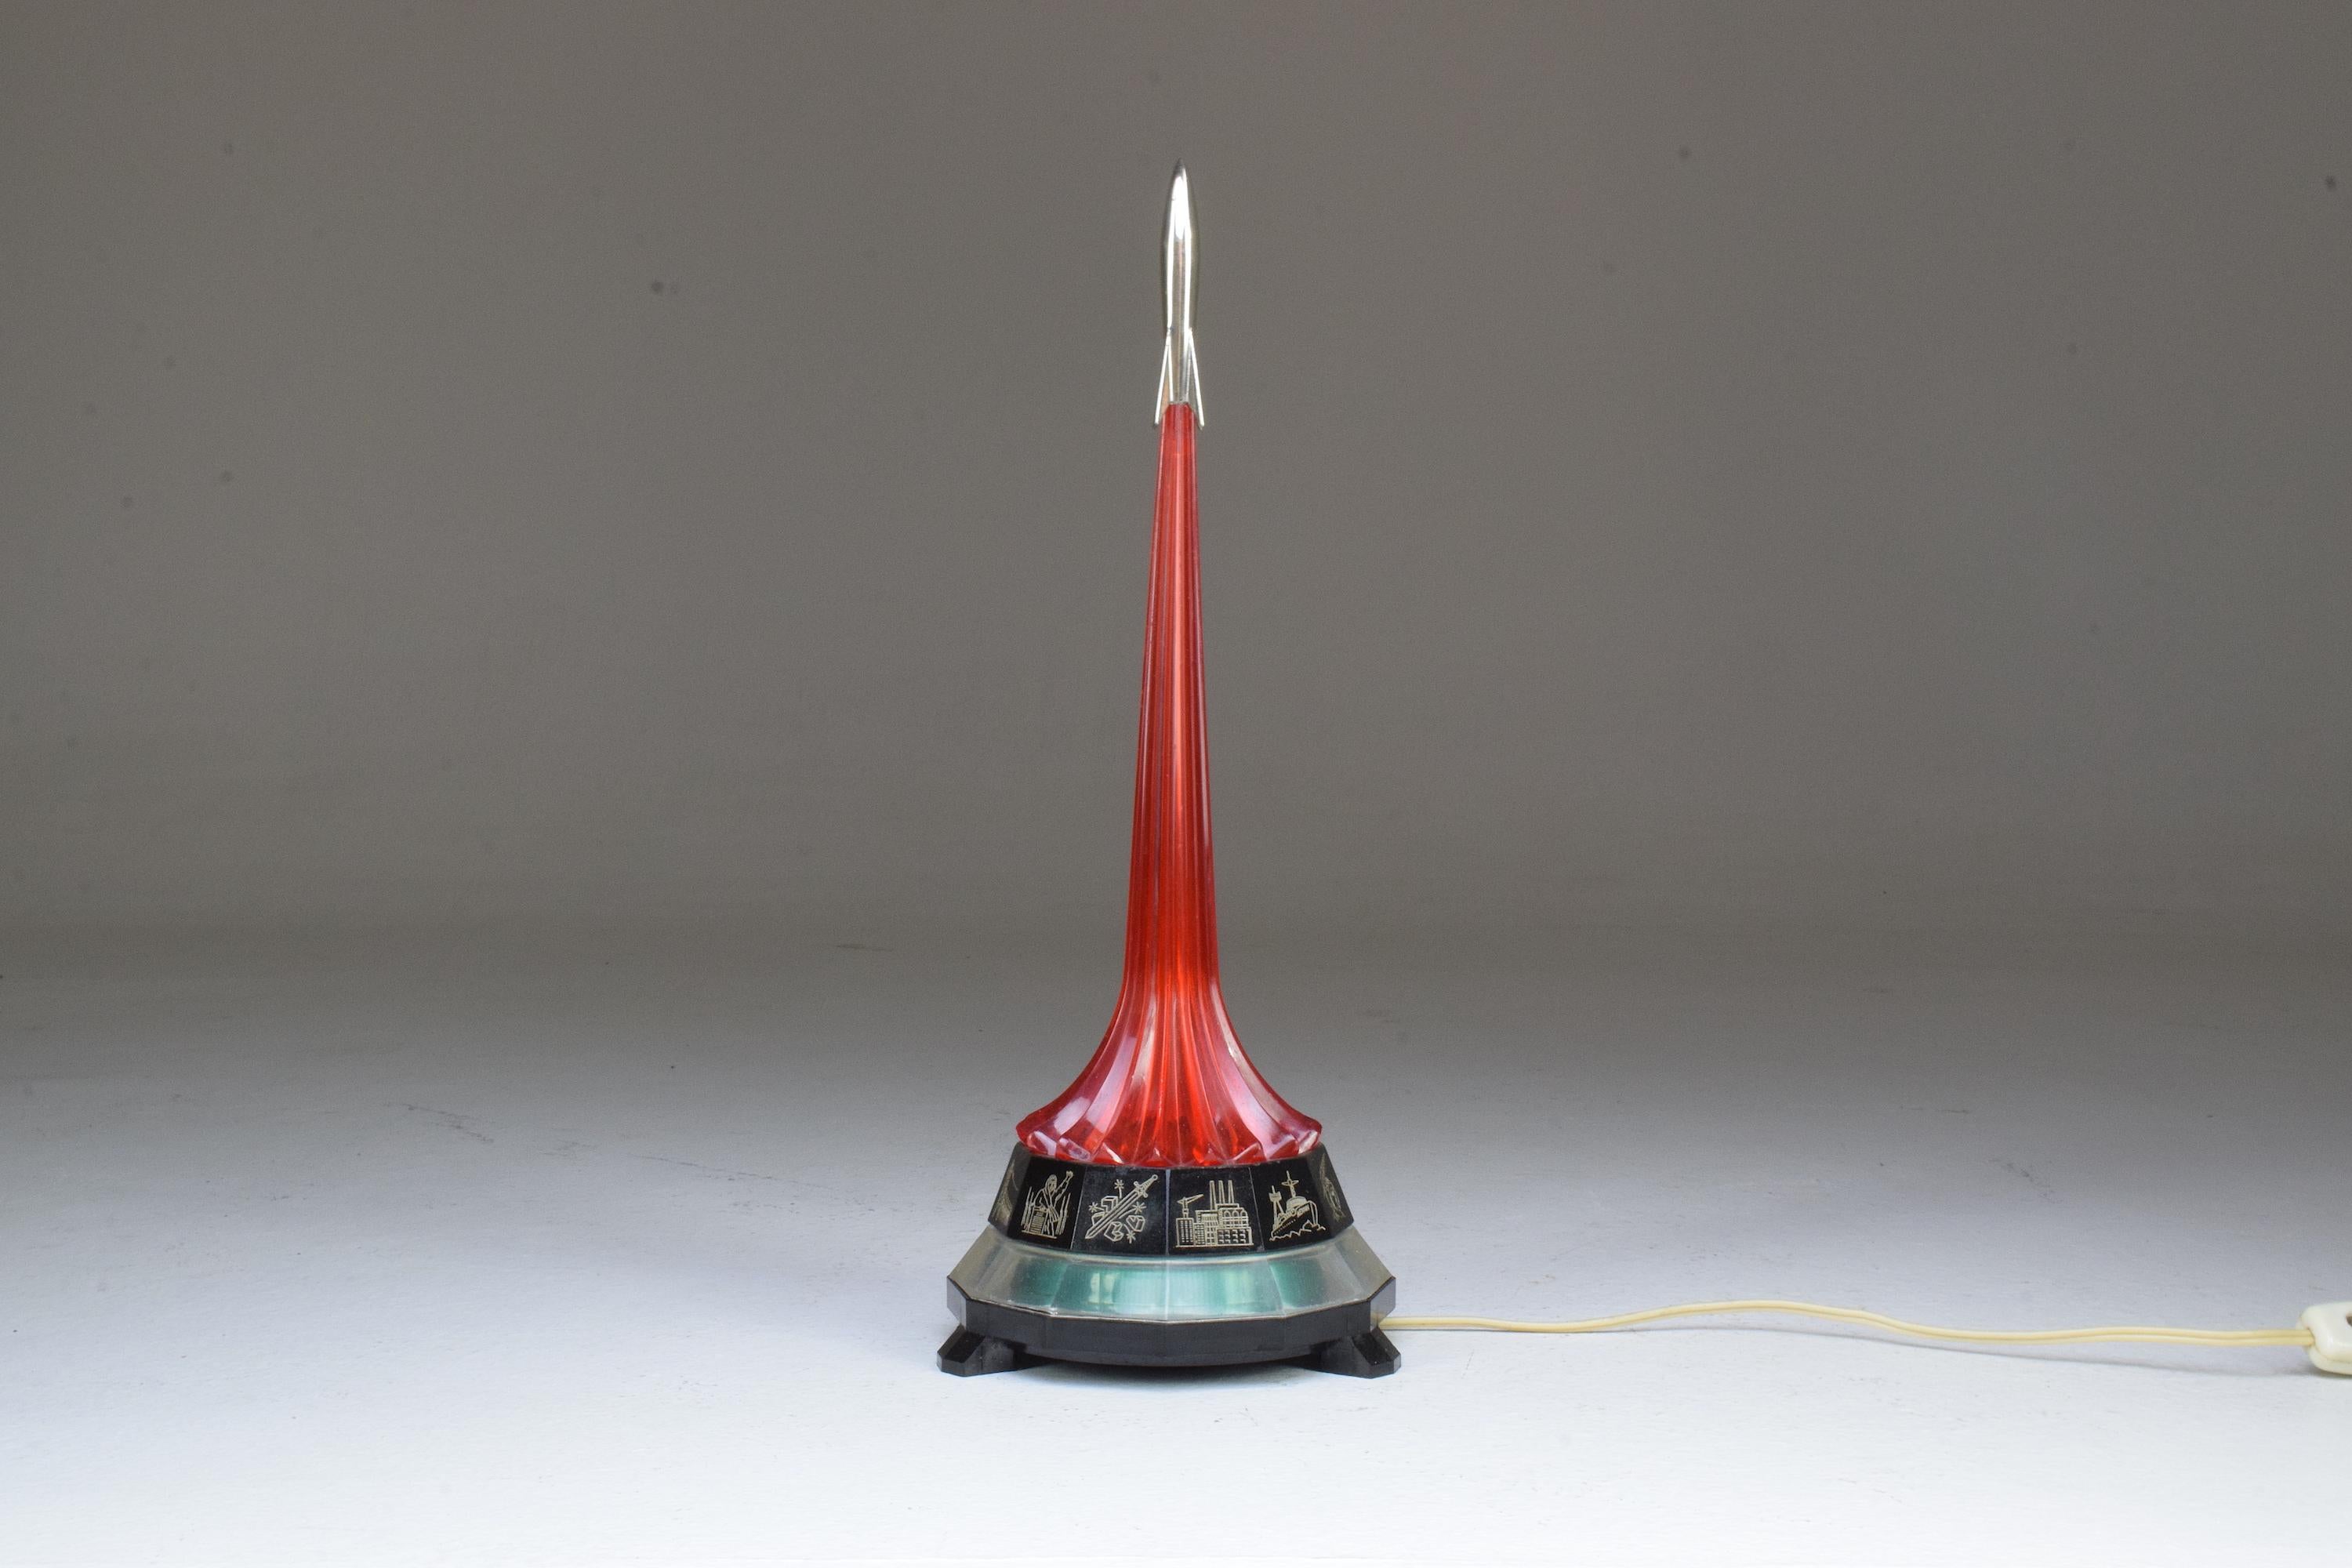 A retro vintage red night light table lamp in the shape of a rocket from the Russian propaganda period and manufacturer at a notable Soviet factory.
Russia, circa 1970s.